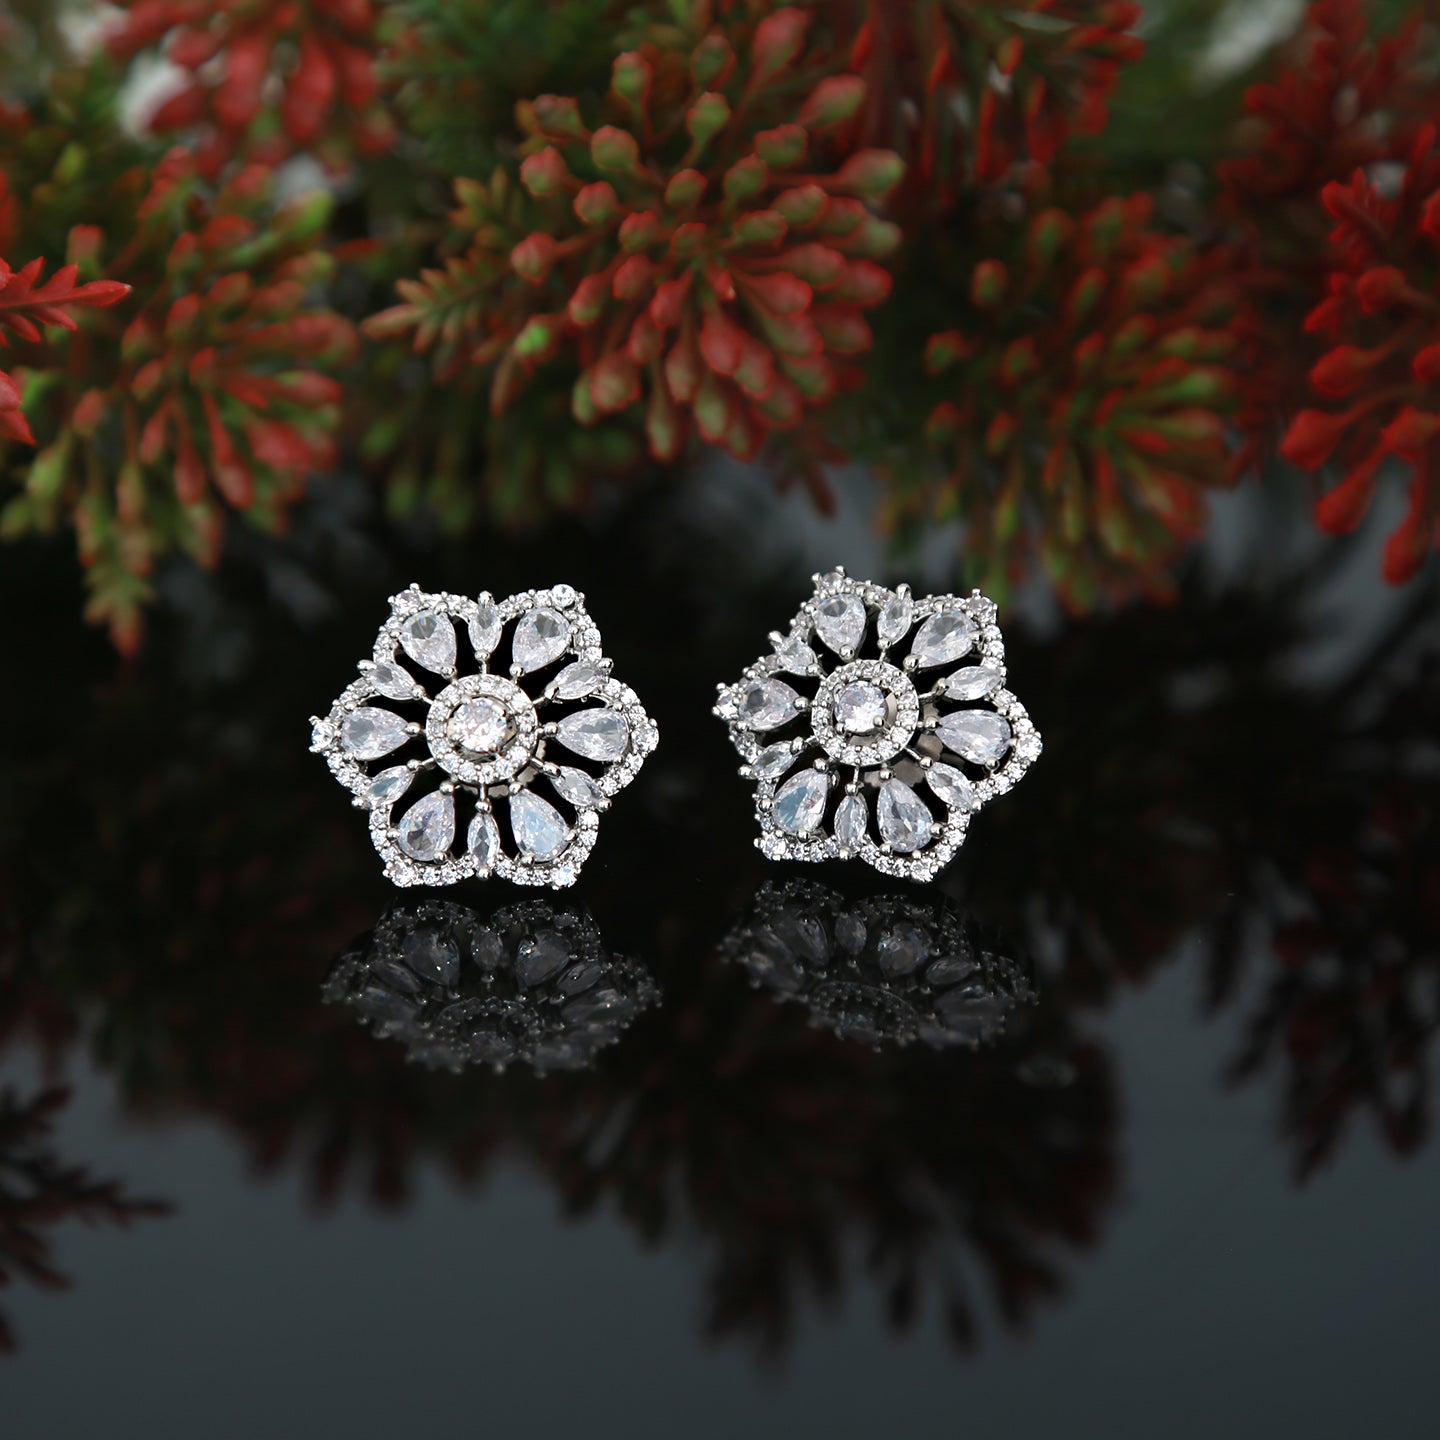 Big Size CZ Silver Plated American Diamond flower shape stud earrings | Color stone Stud Earrings | Rhodium Plated Silver tops |Gift for her